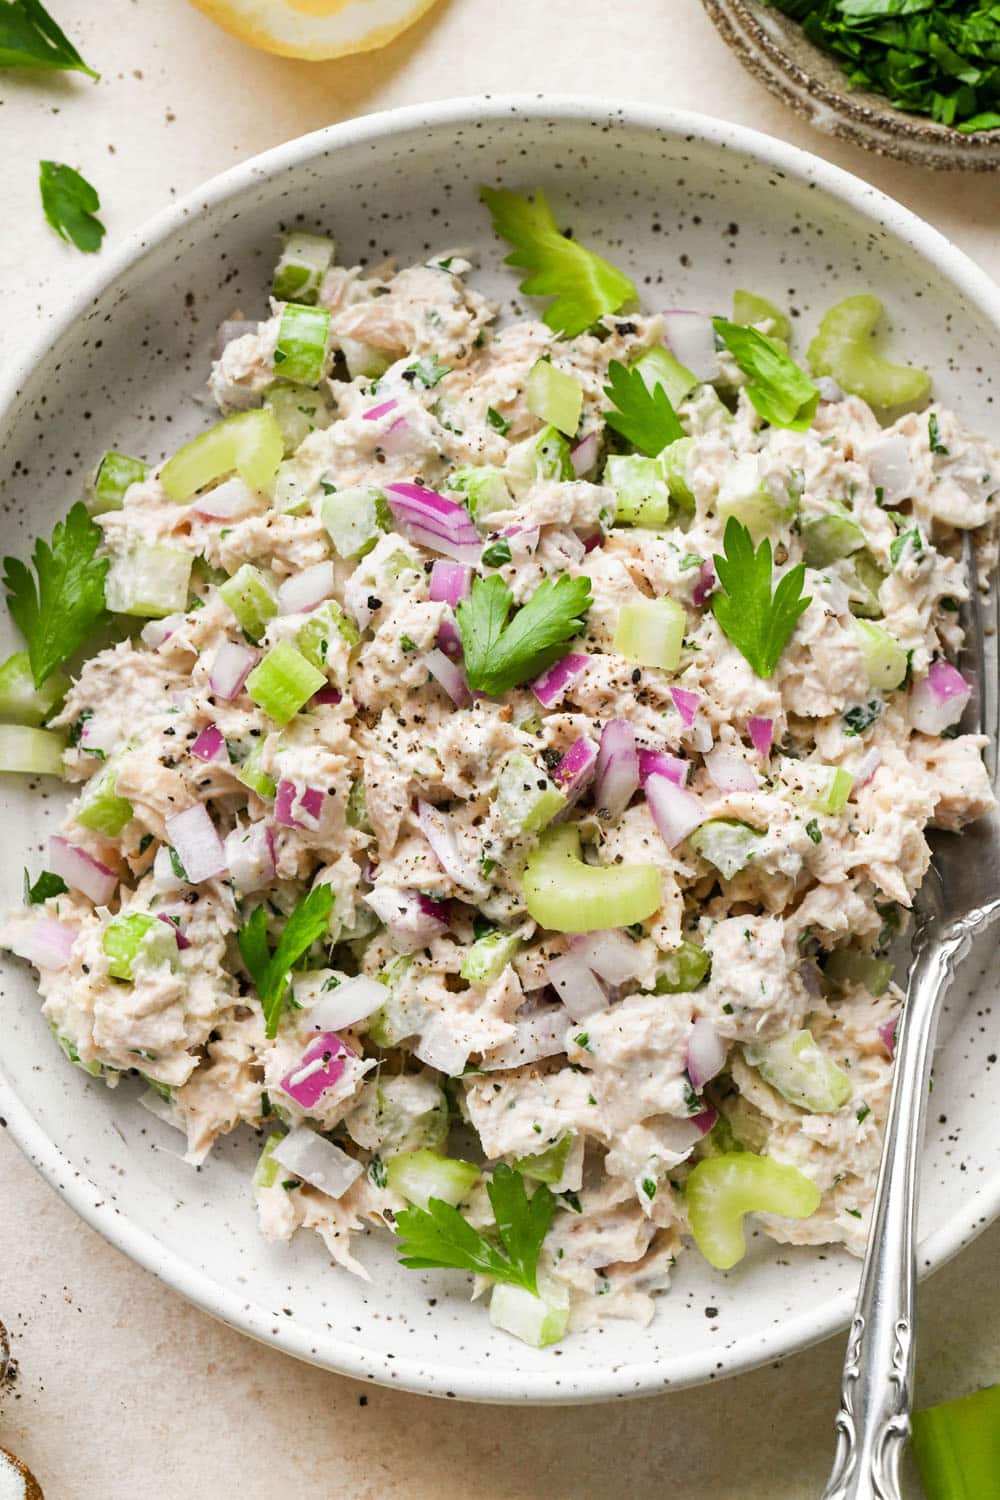 Tuna salad in a shallow ceramic bowl topped with some extra pieces of chopped celery, red onion, and parsley.